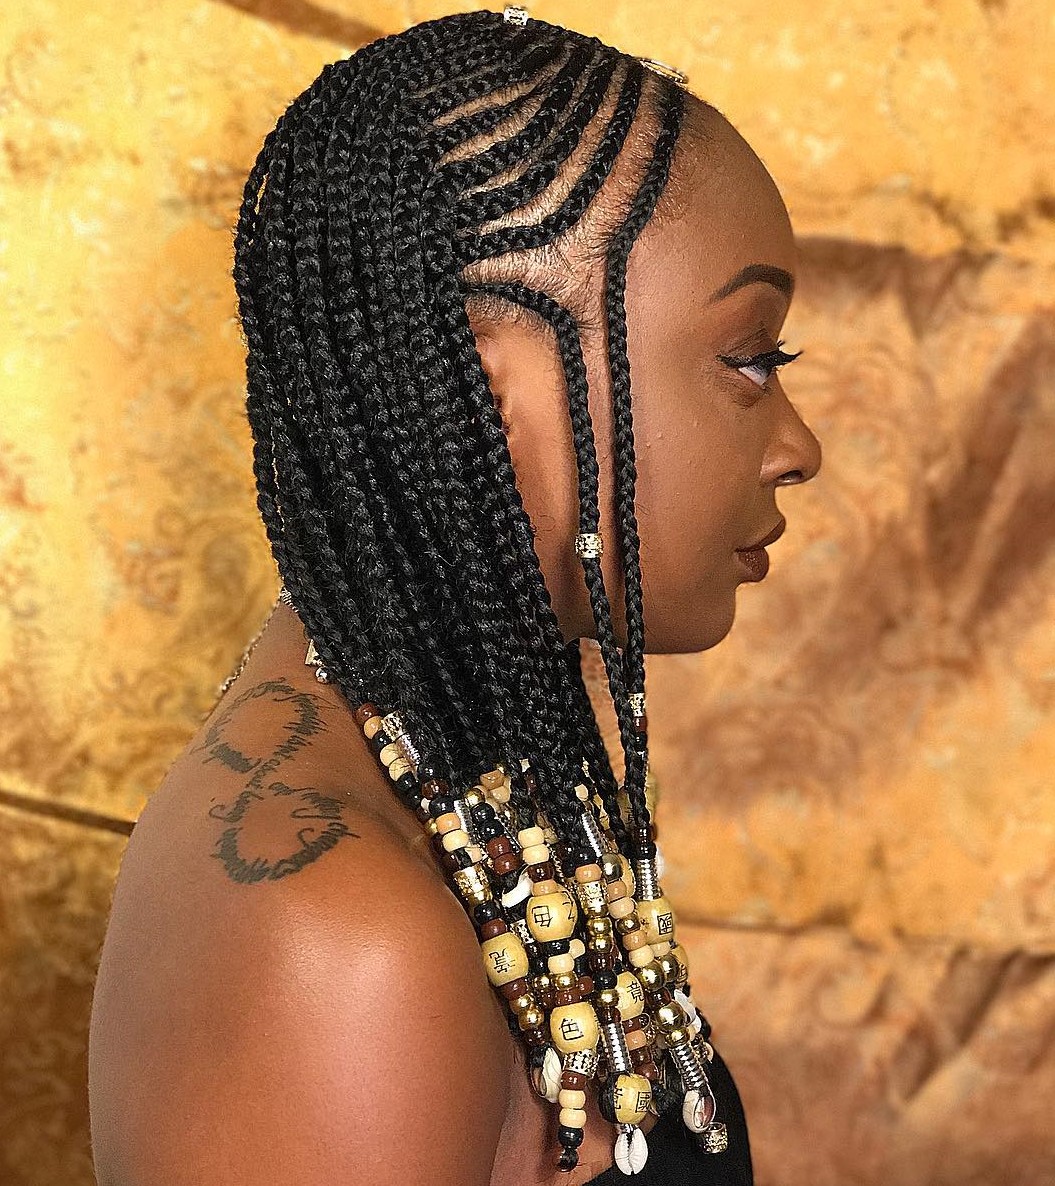 General reccomend Braided hairy style for black women